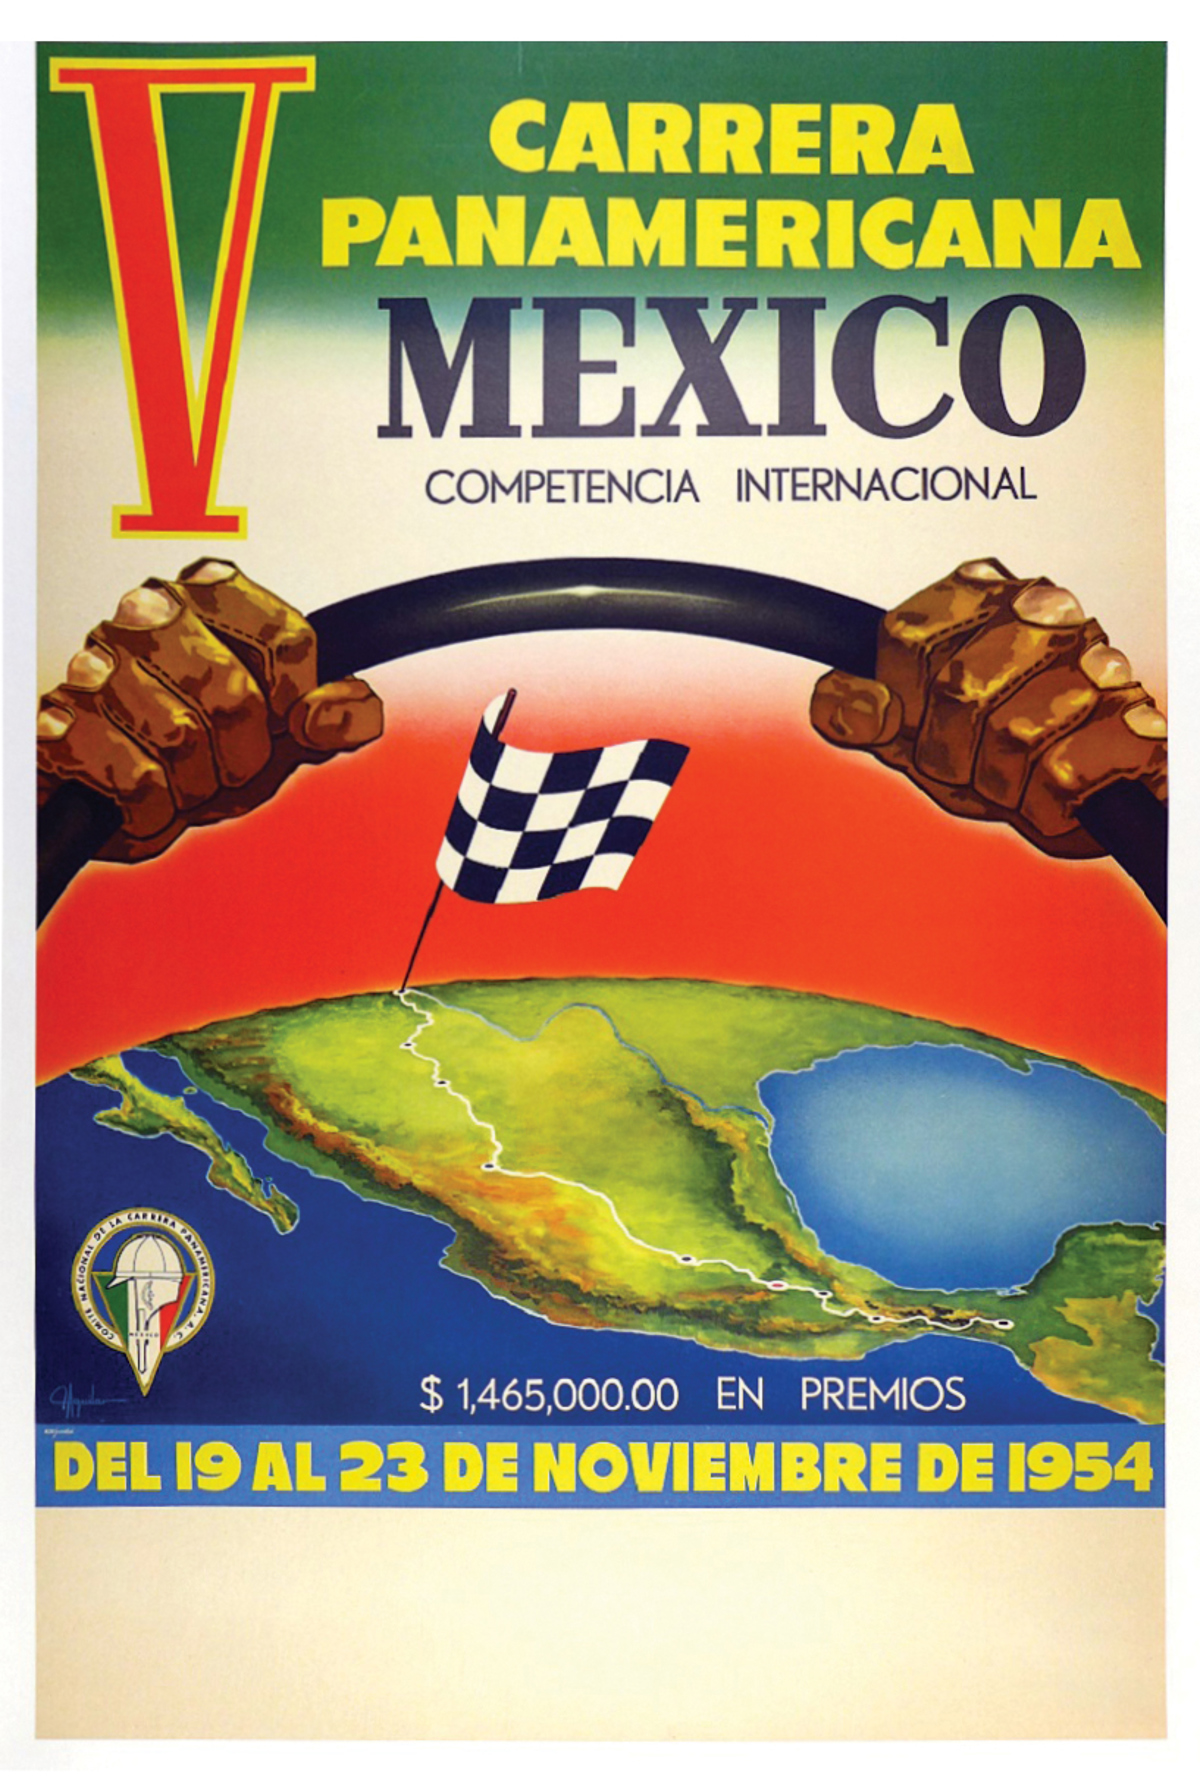 V Carrera Panamericana Mexico 1954 offered in RM Sotheby’s Original Racing Posters online auction